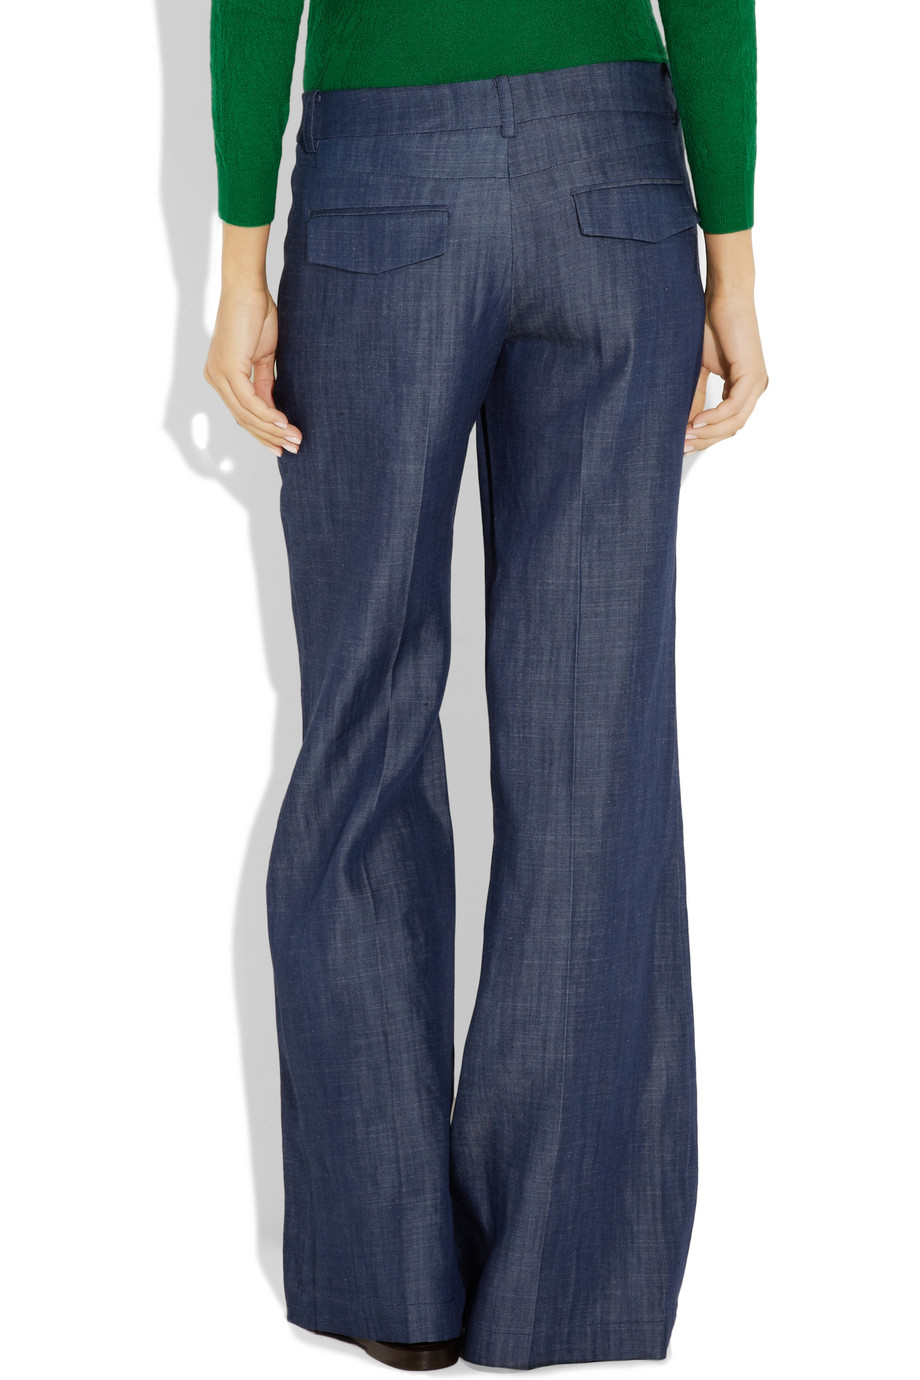 Tibi Low-rise Chambray Wide-leg Jeans in Blue - Lyst